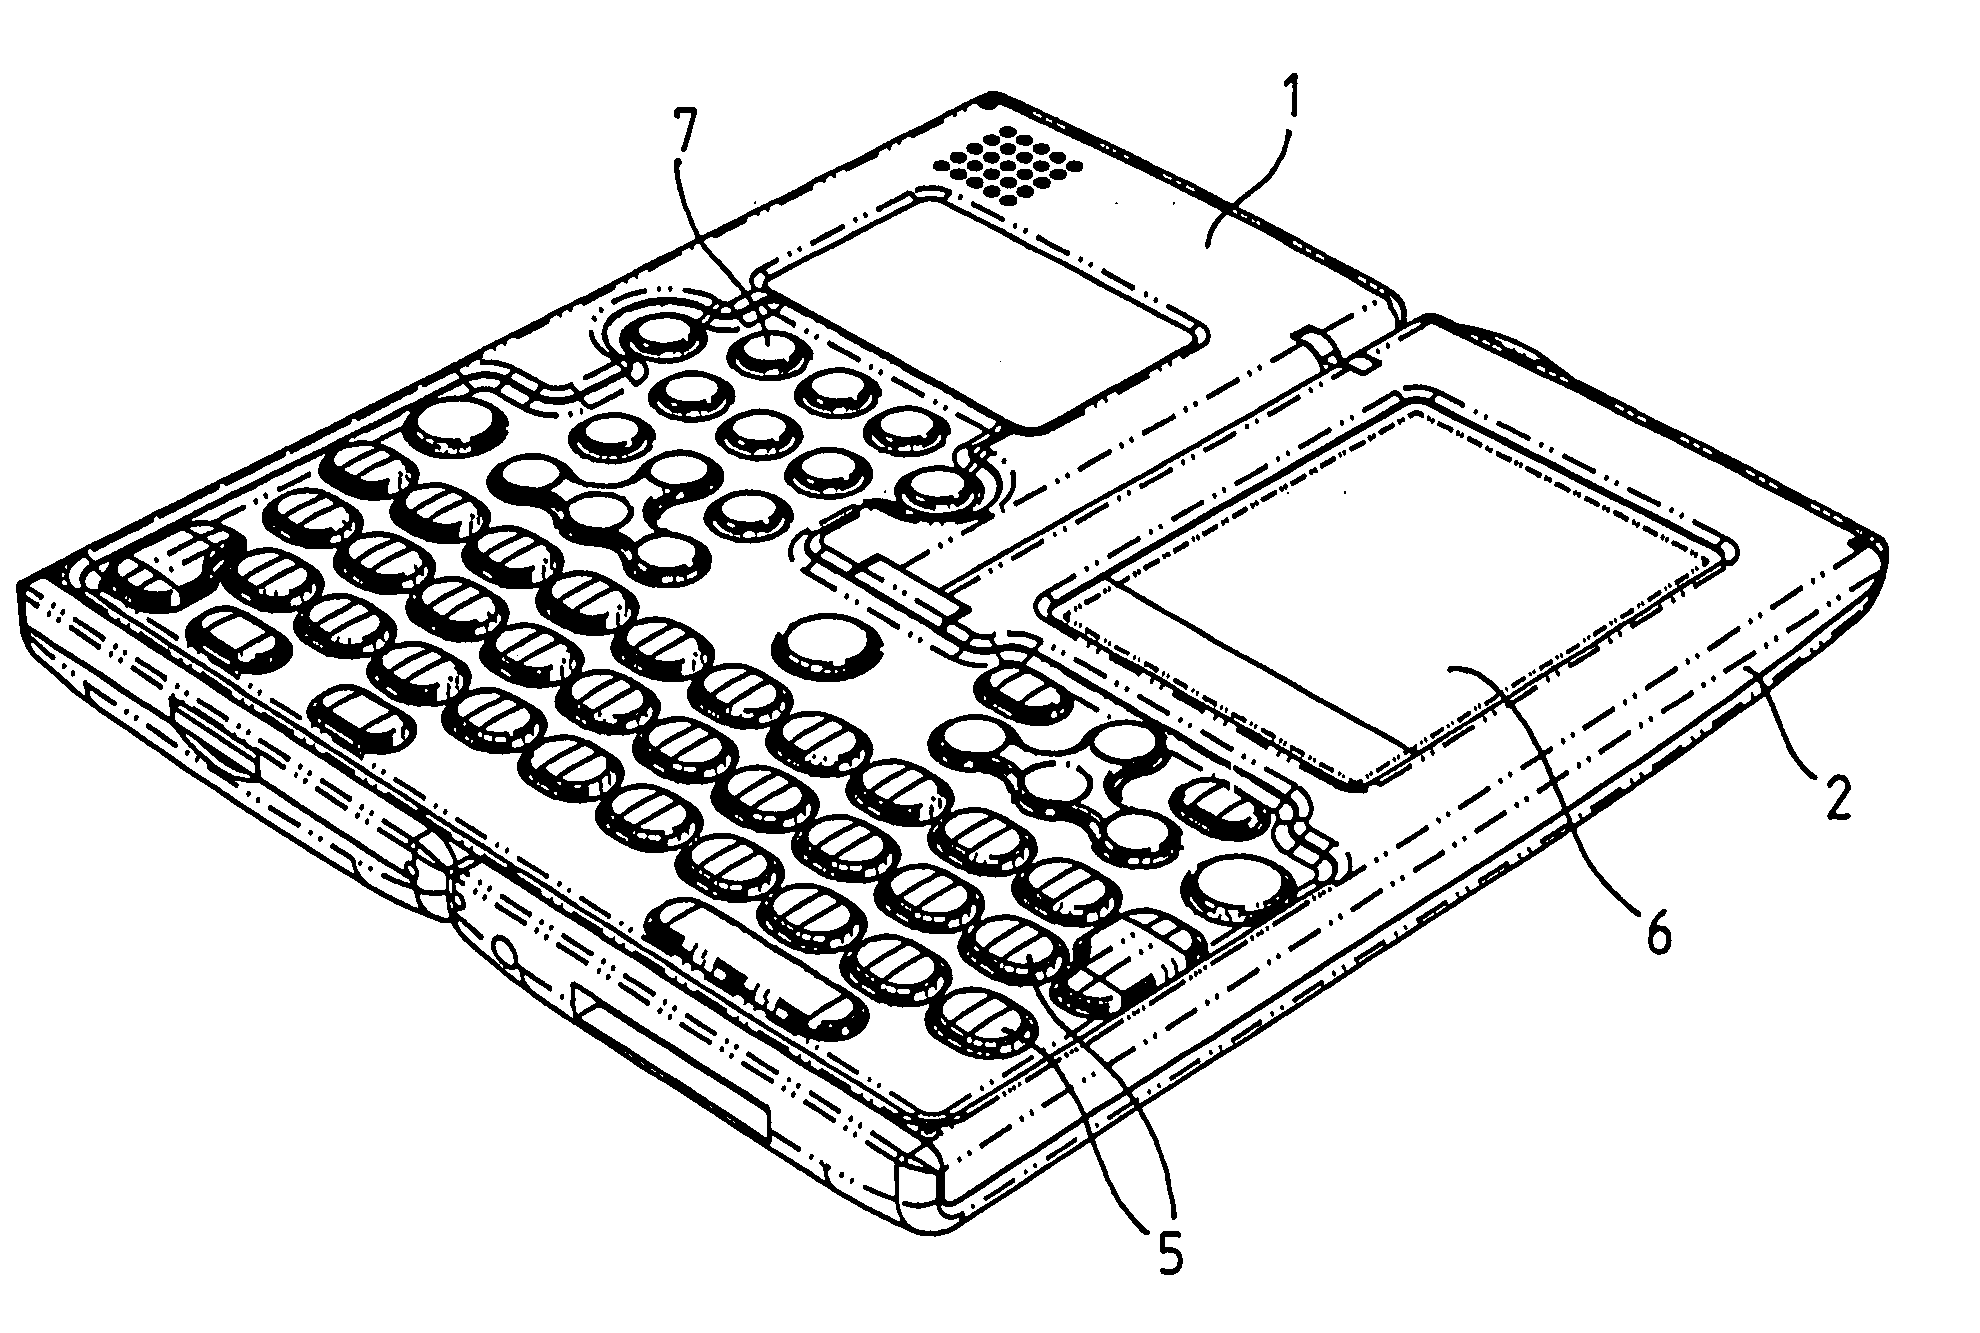 Combined computer and communications apparatus